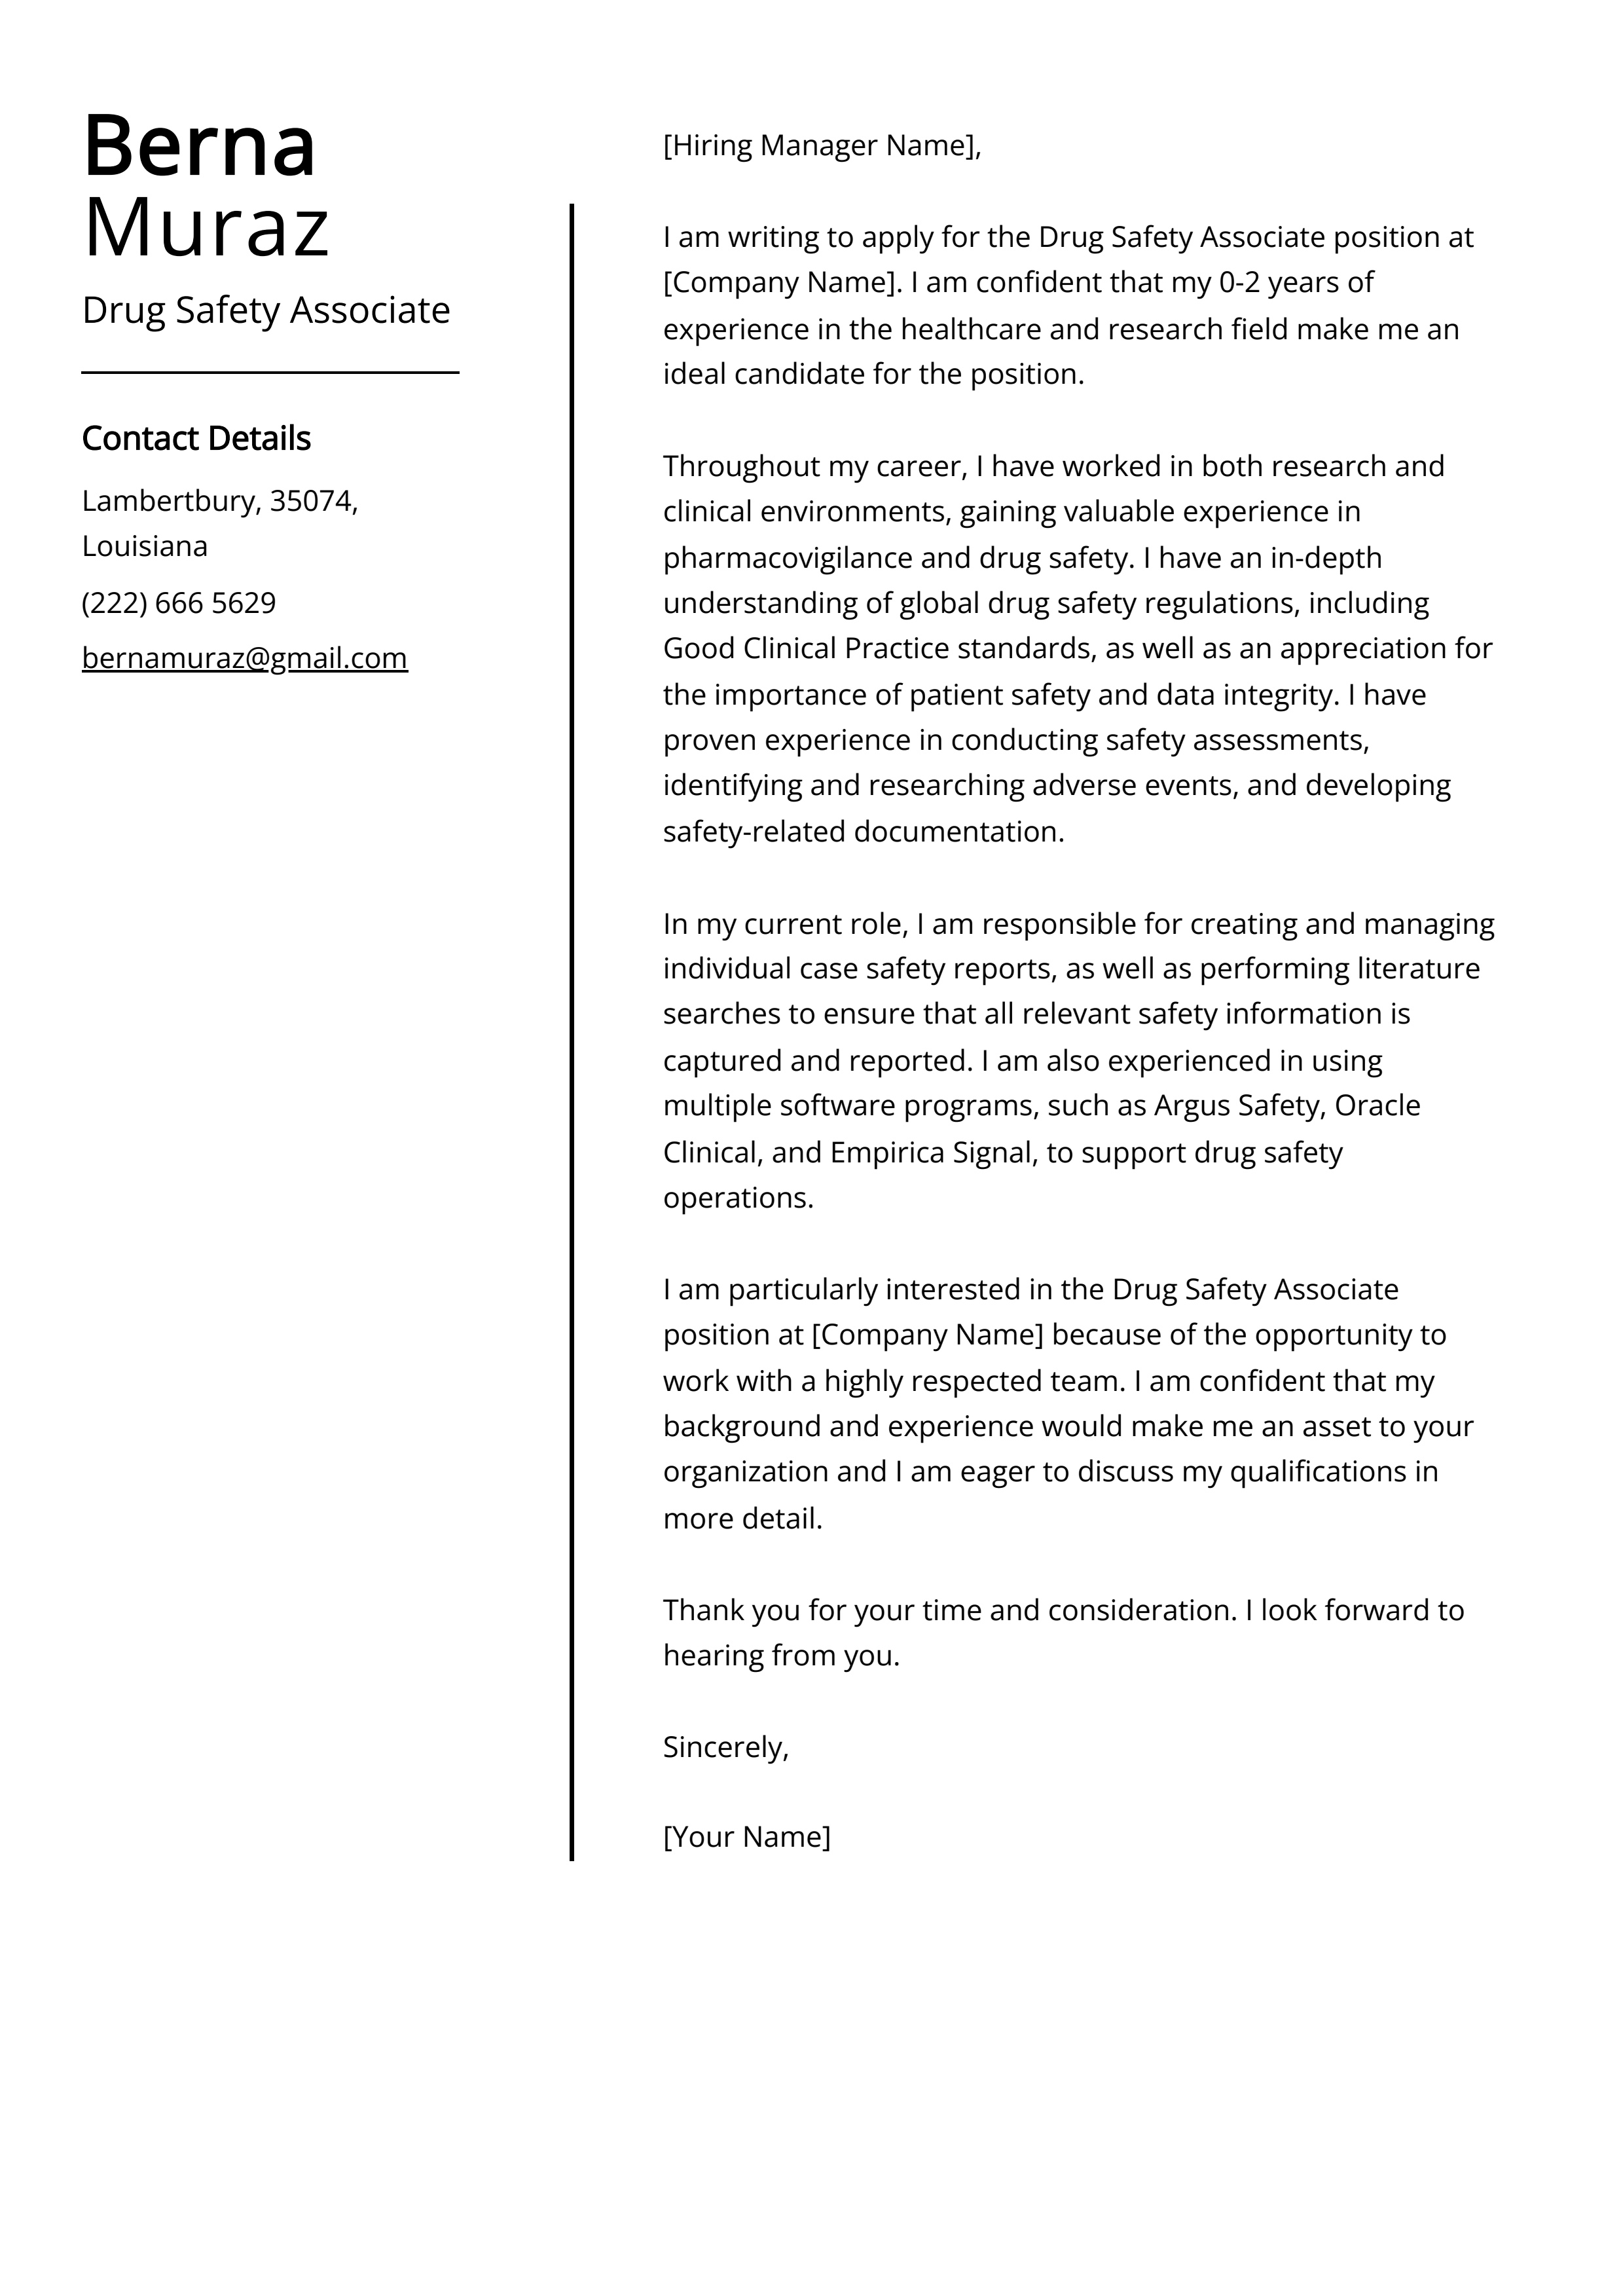 Drug Safety Associate Cover Letter Example